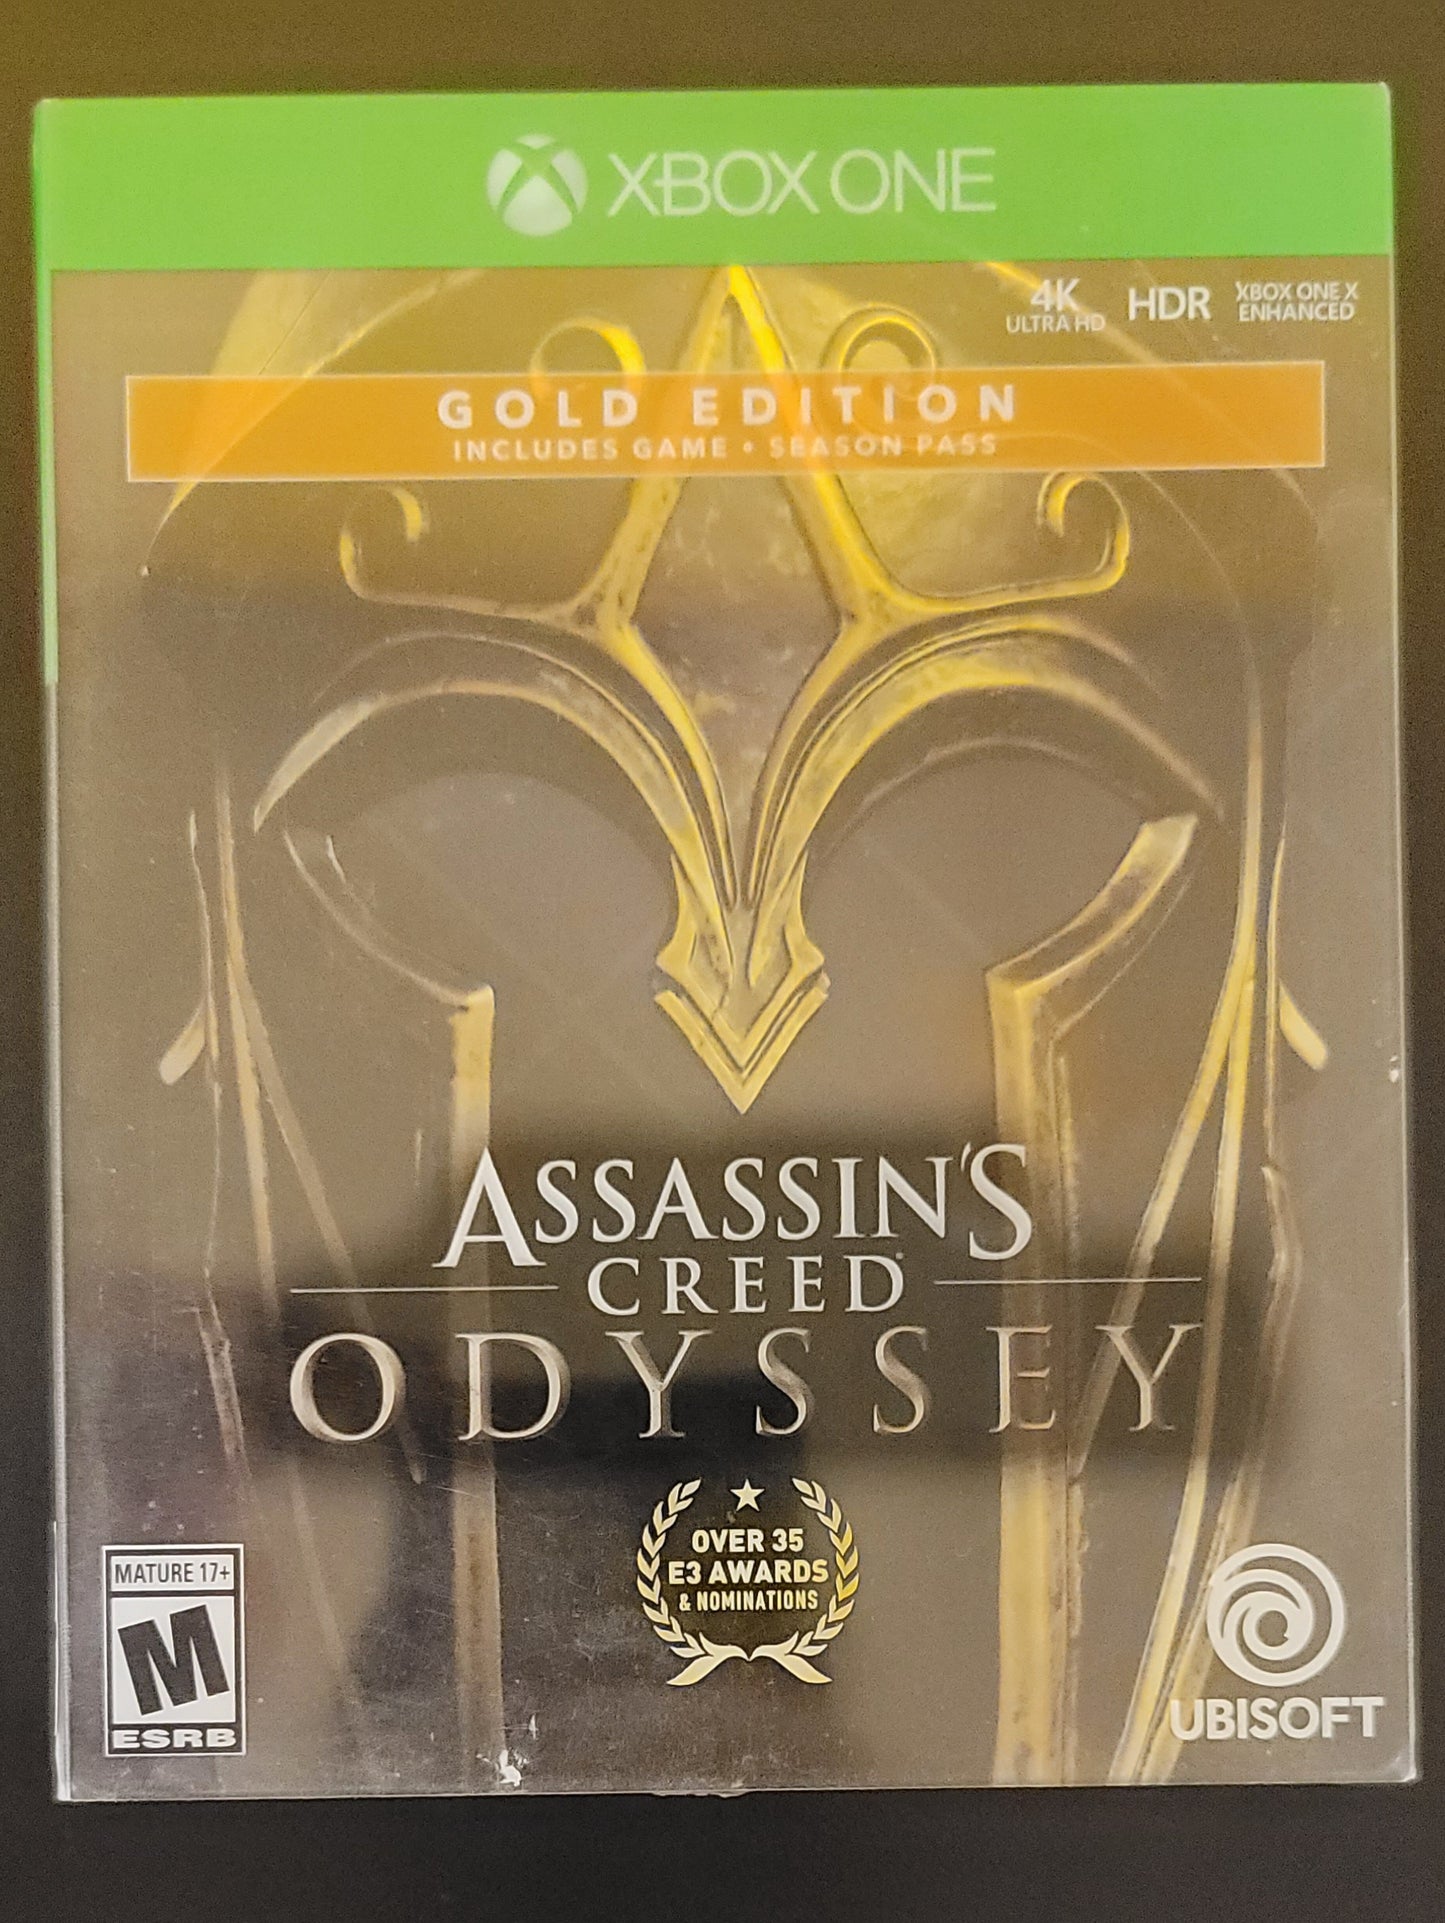 Assassin’s Creed Odyssey Gold Edition - Xb1 - Used